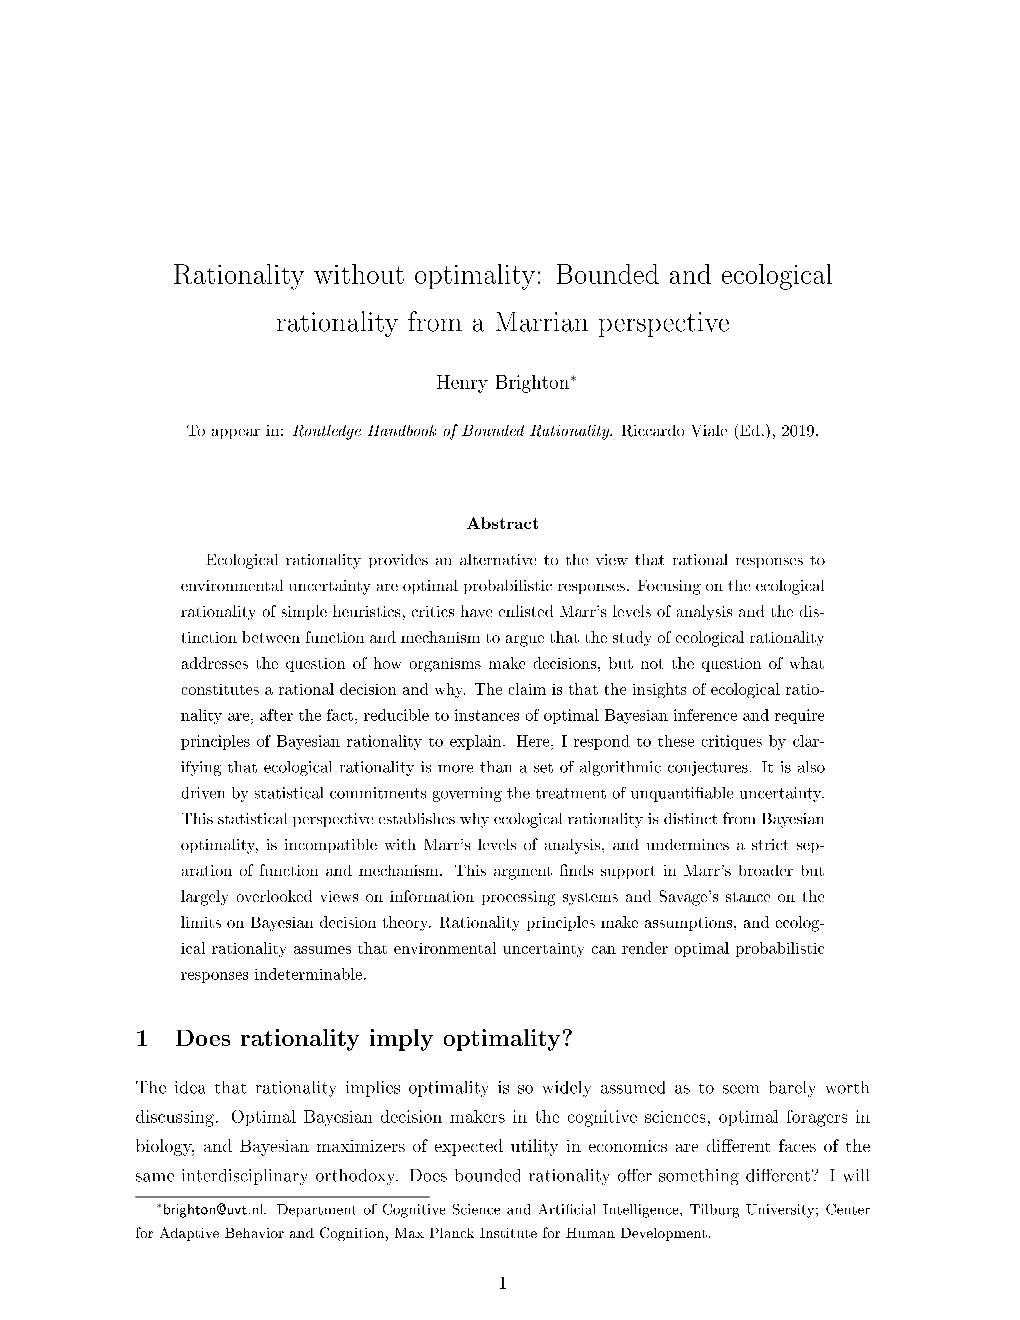 Bounded and Ecological Rationality from a Marrian Perspective 1 Does Rationality Imply Optimalit